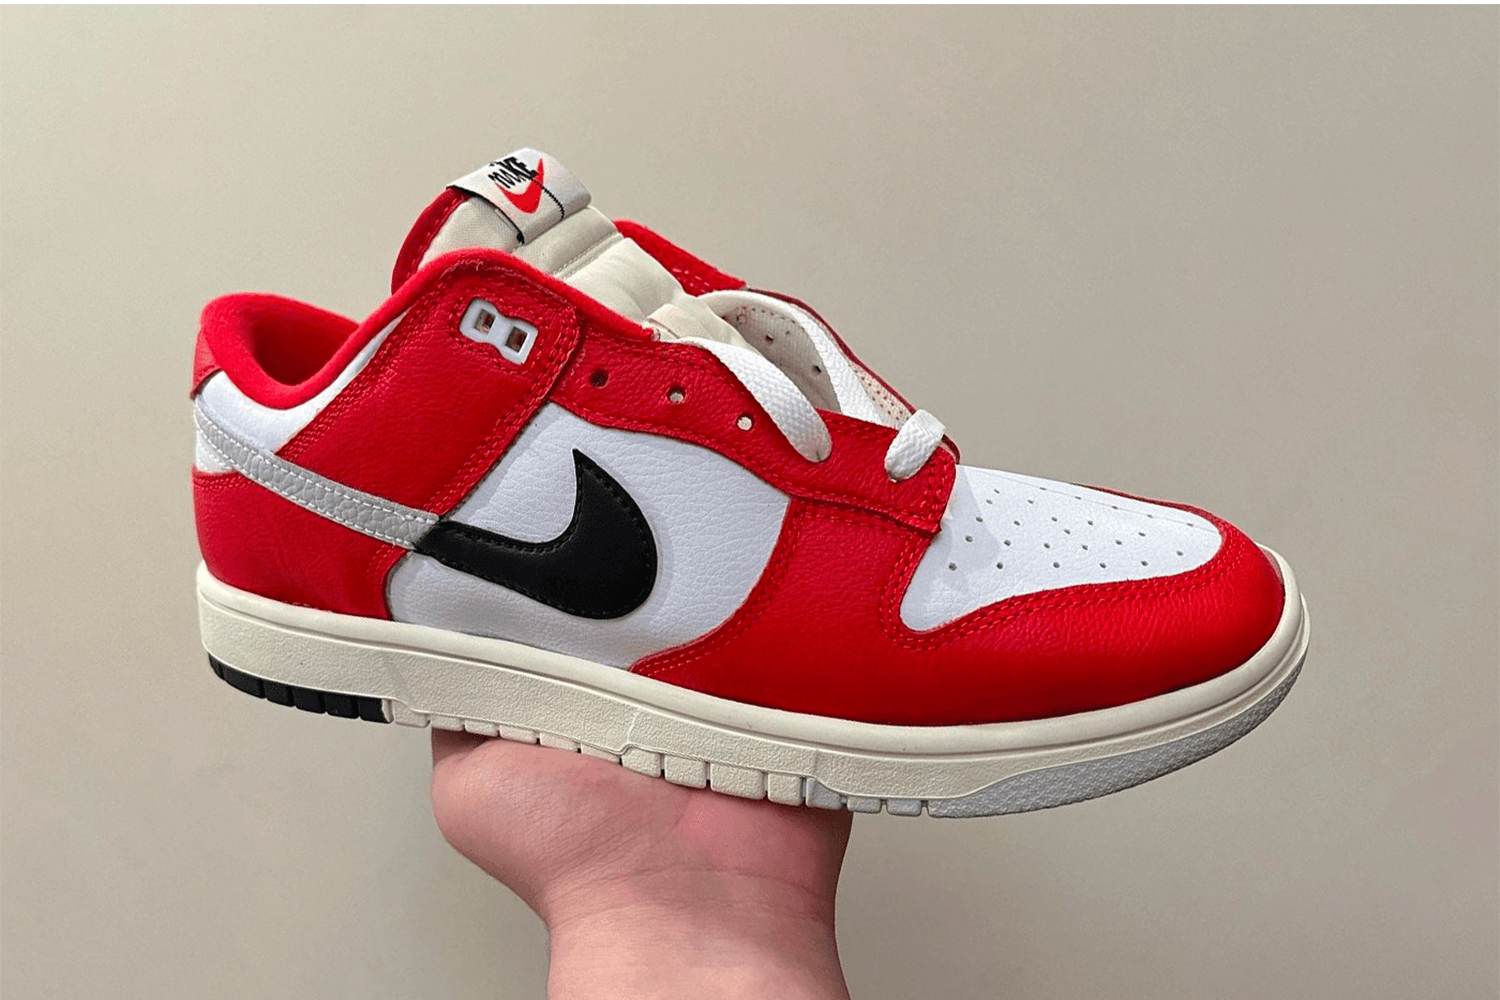 Upcoming Nike Dunk Low in the renowned Chicago colorway